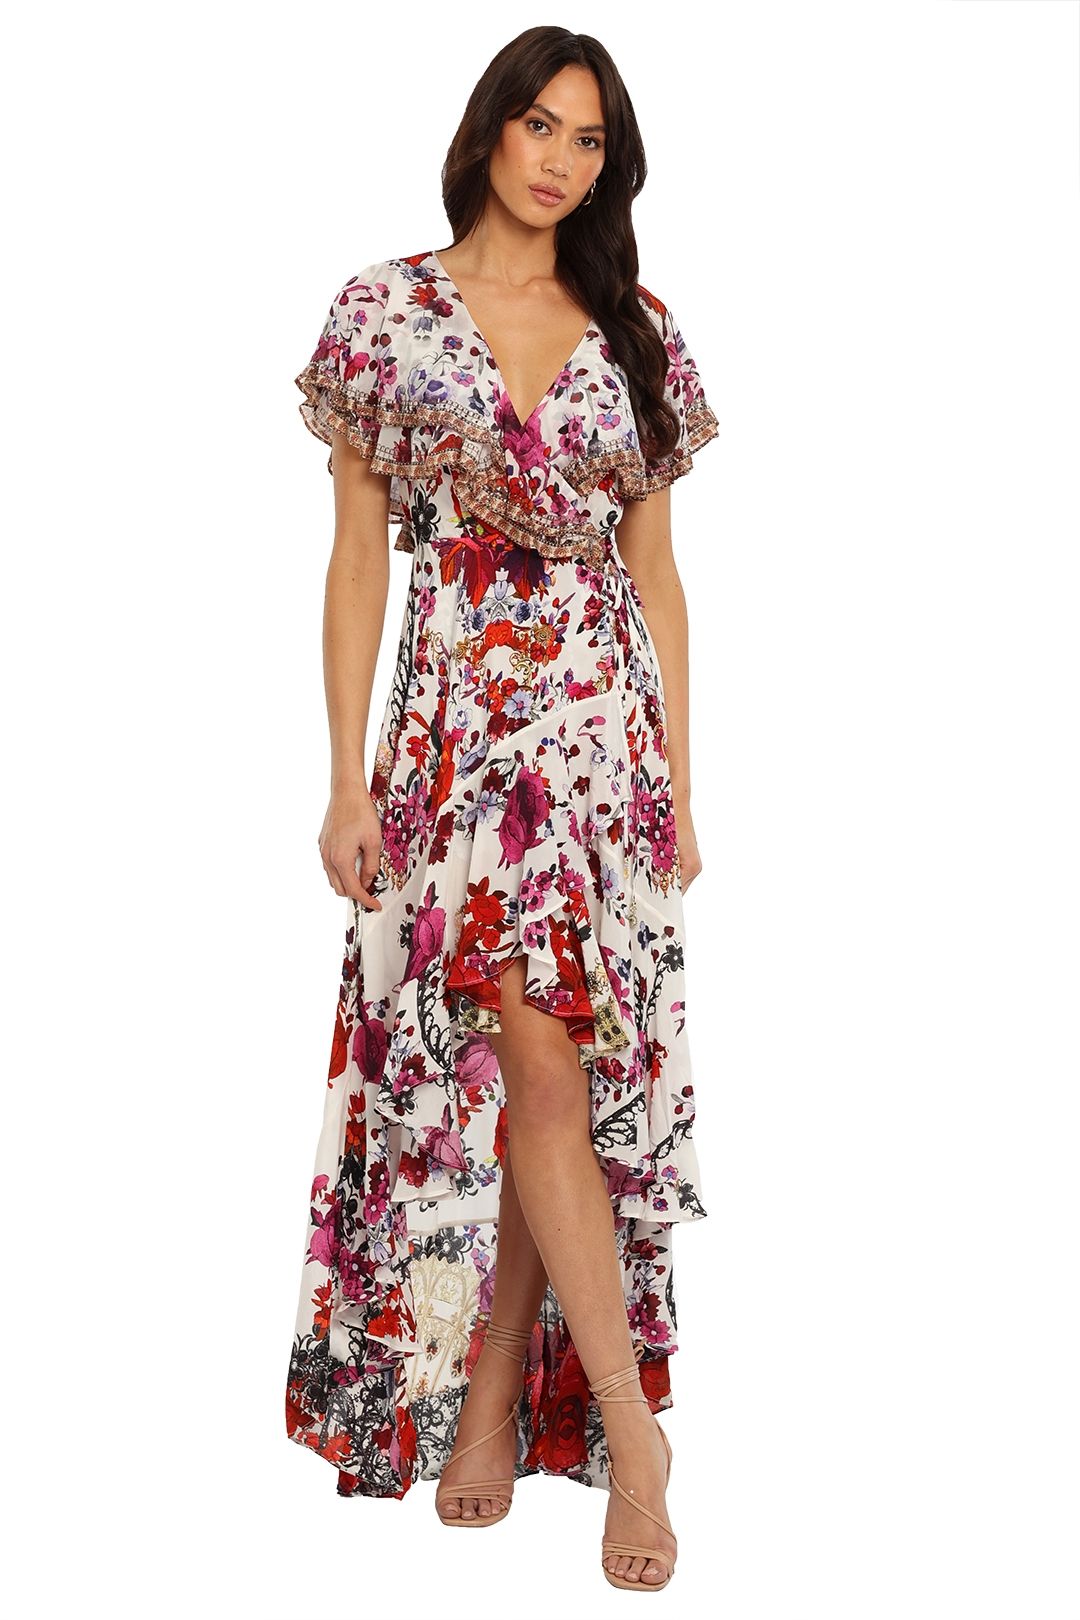 Camilla Reign Of Roses Tiered Midi Dress